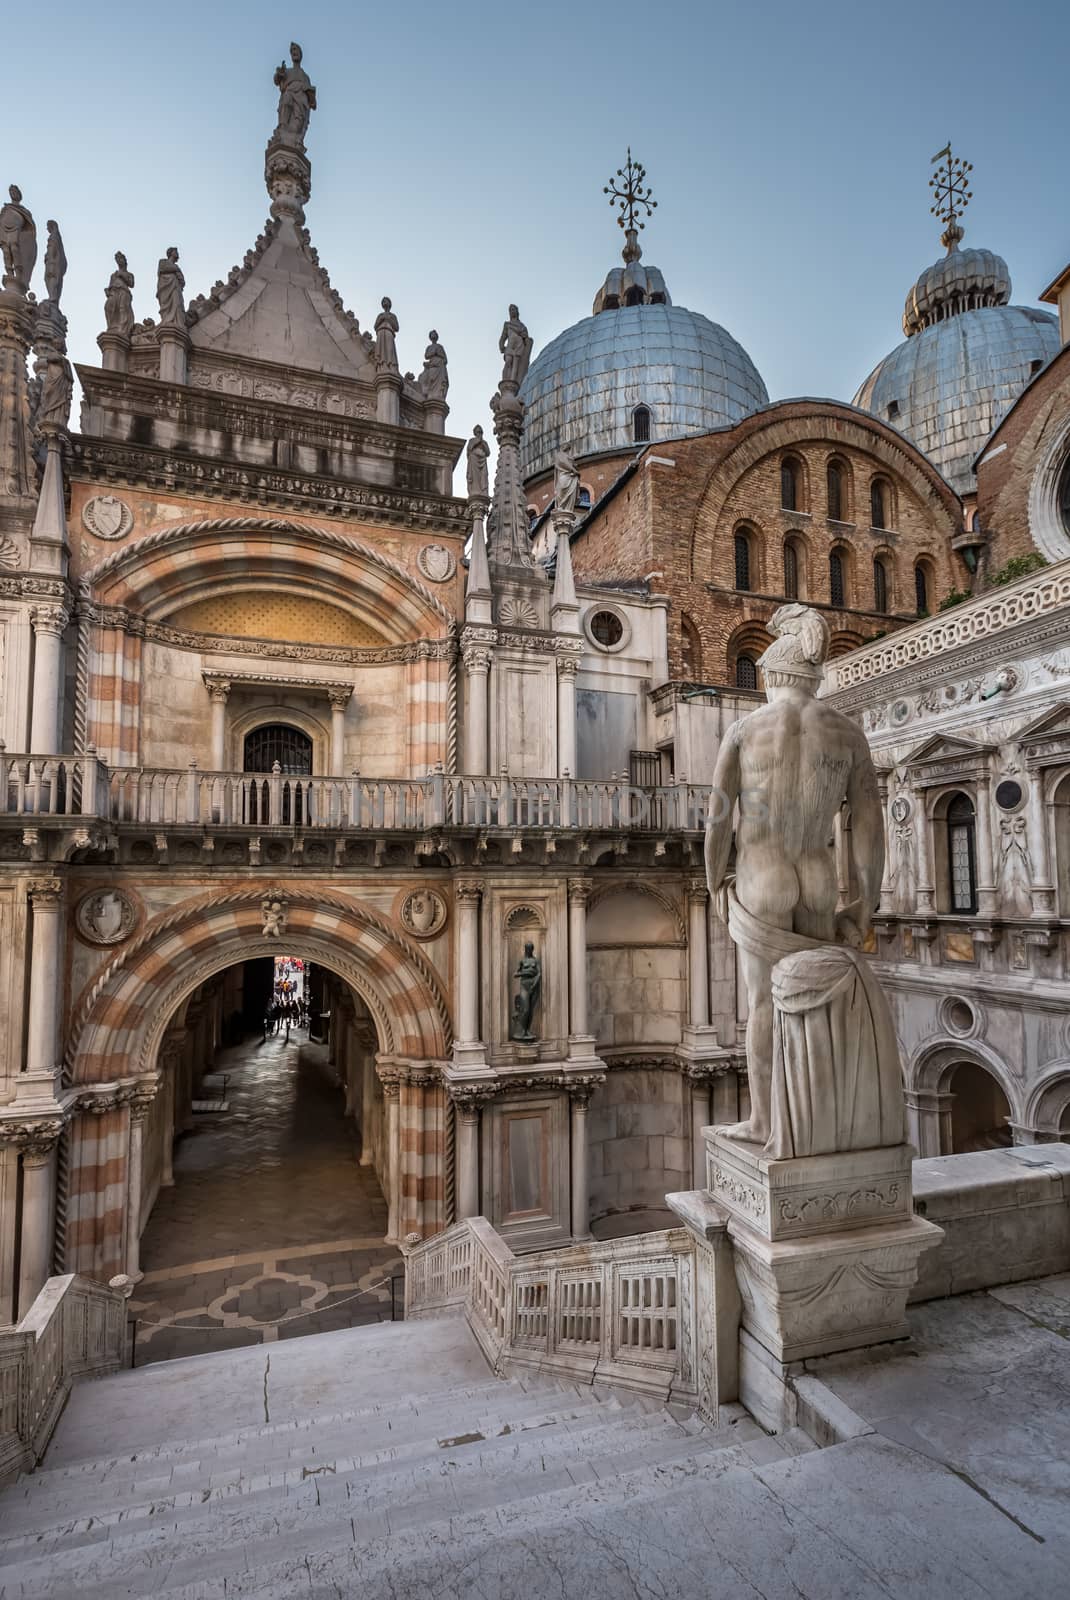 Palazzo Ducale (Doge's Palace) and San Marco Cathedral in Venice, Italy